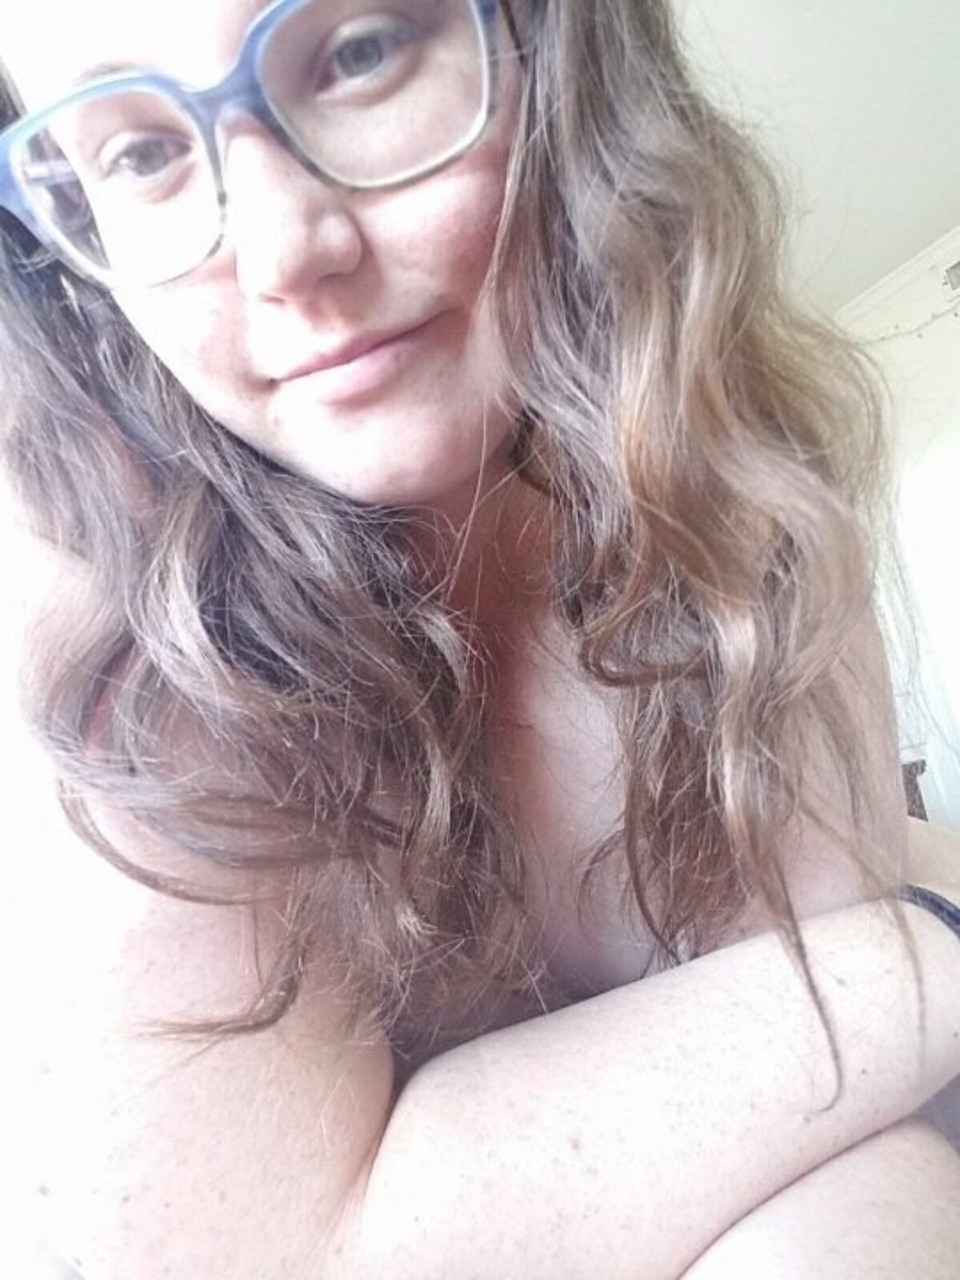 mdptny: Another submission from this cutie, Kat. She sells her pictures on kik (serious